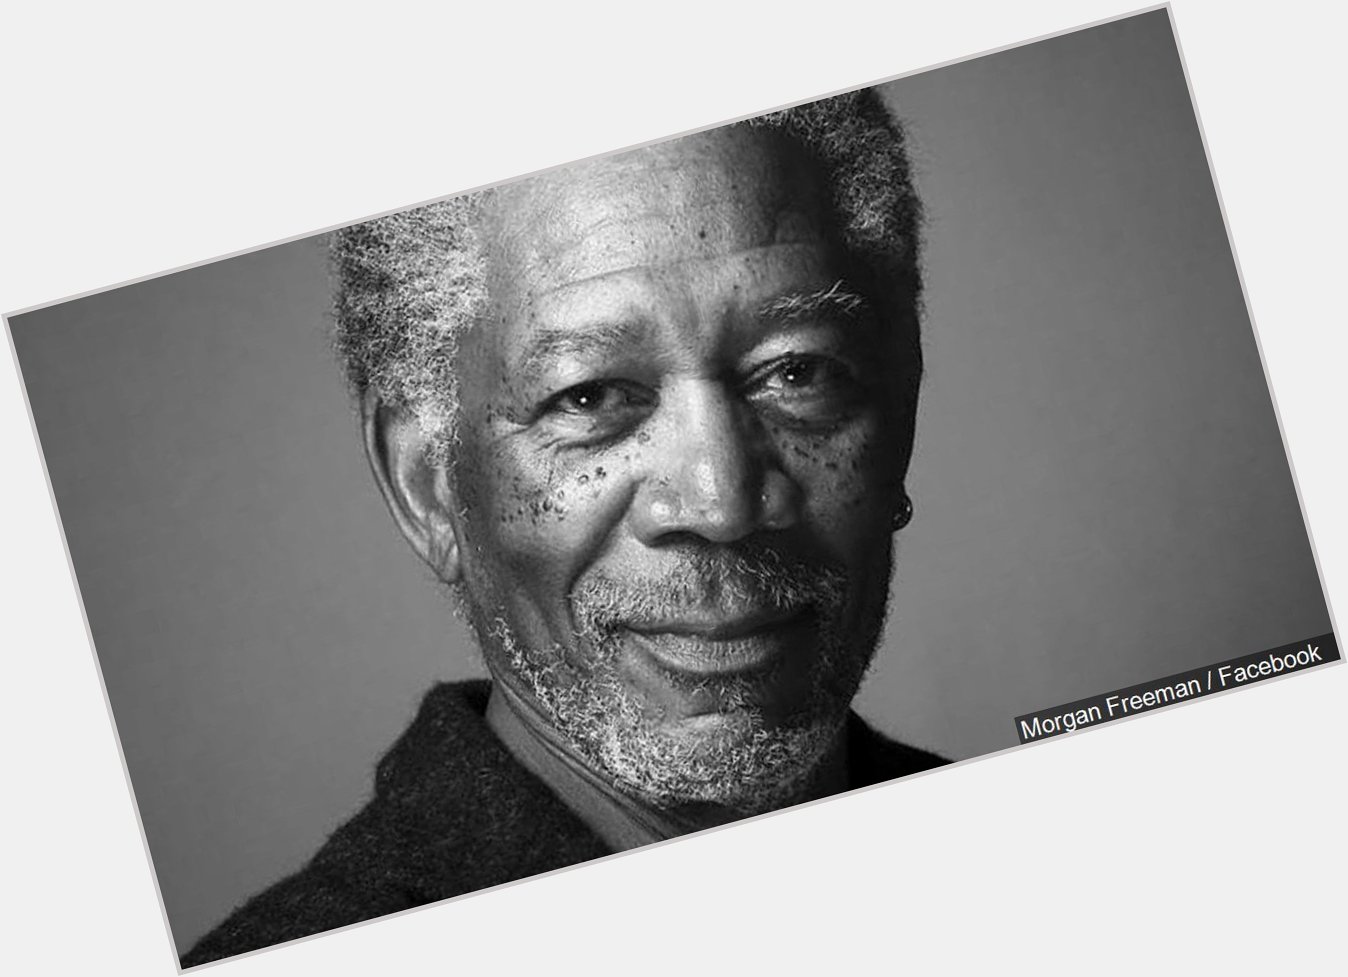 Happy birthday, Morgan Freeman! The actor, producer and narrator turns 80 years old today. 